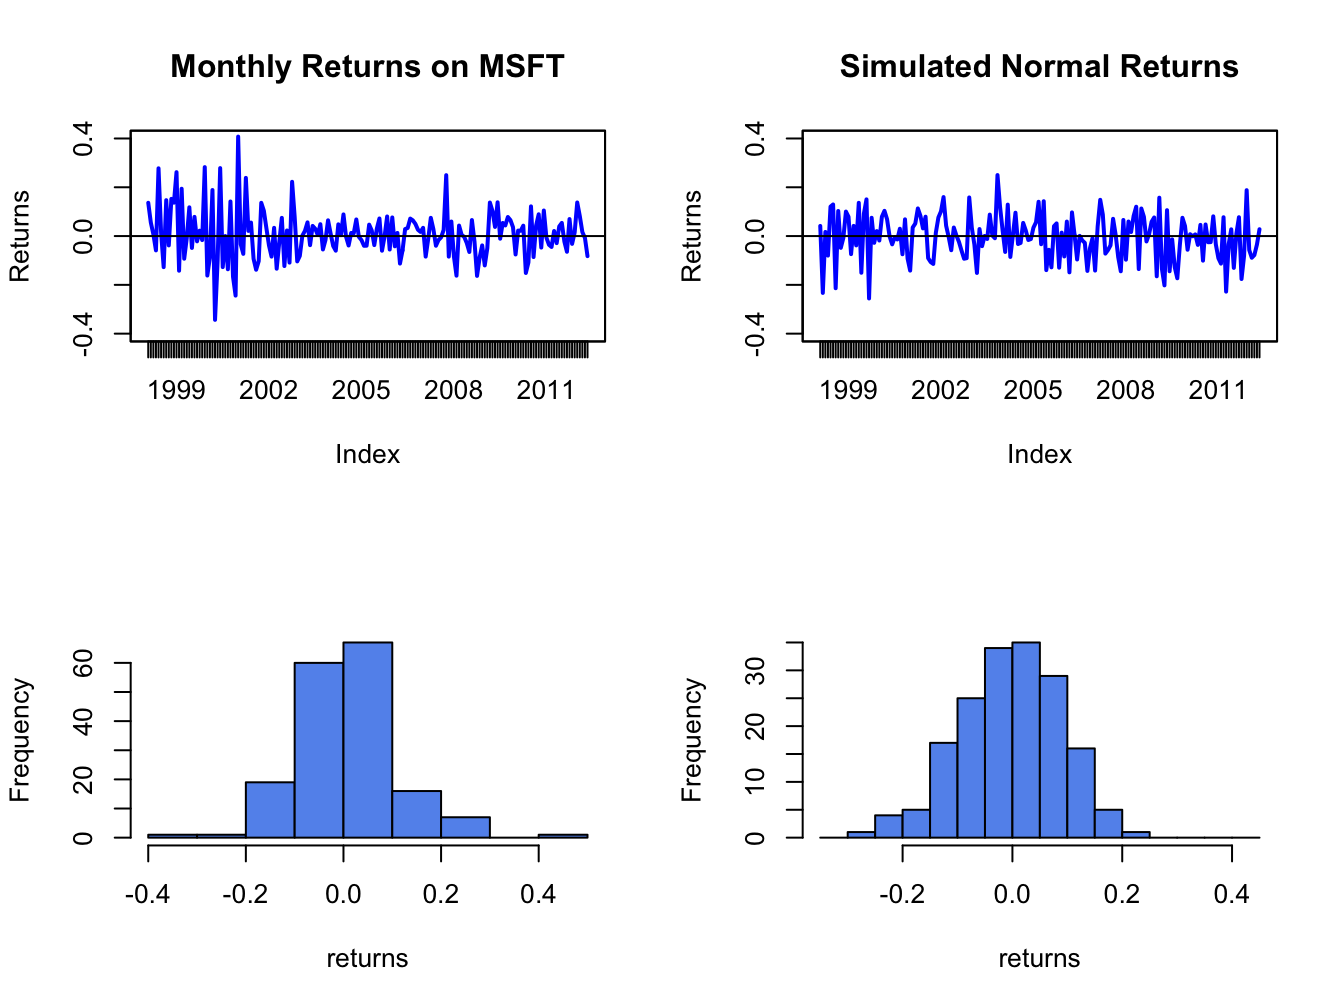 Comparison of Microsoft monthly returns with simulated normal returns with the same mean and standard deviation as the Microsoft returns.